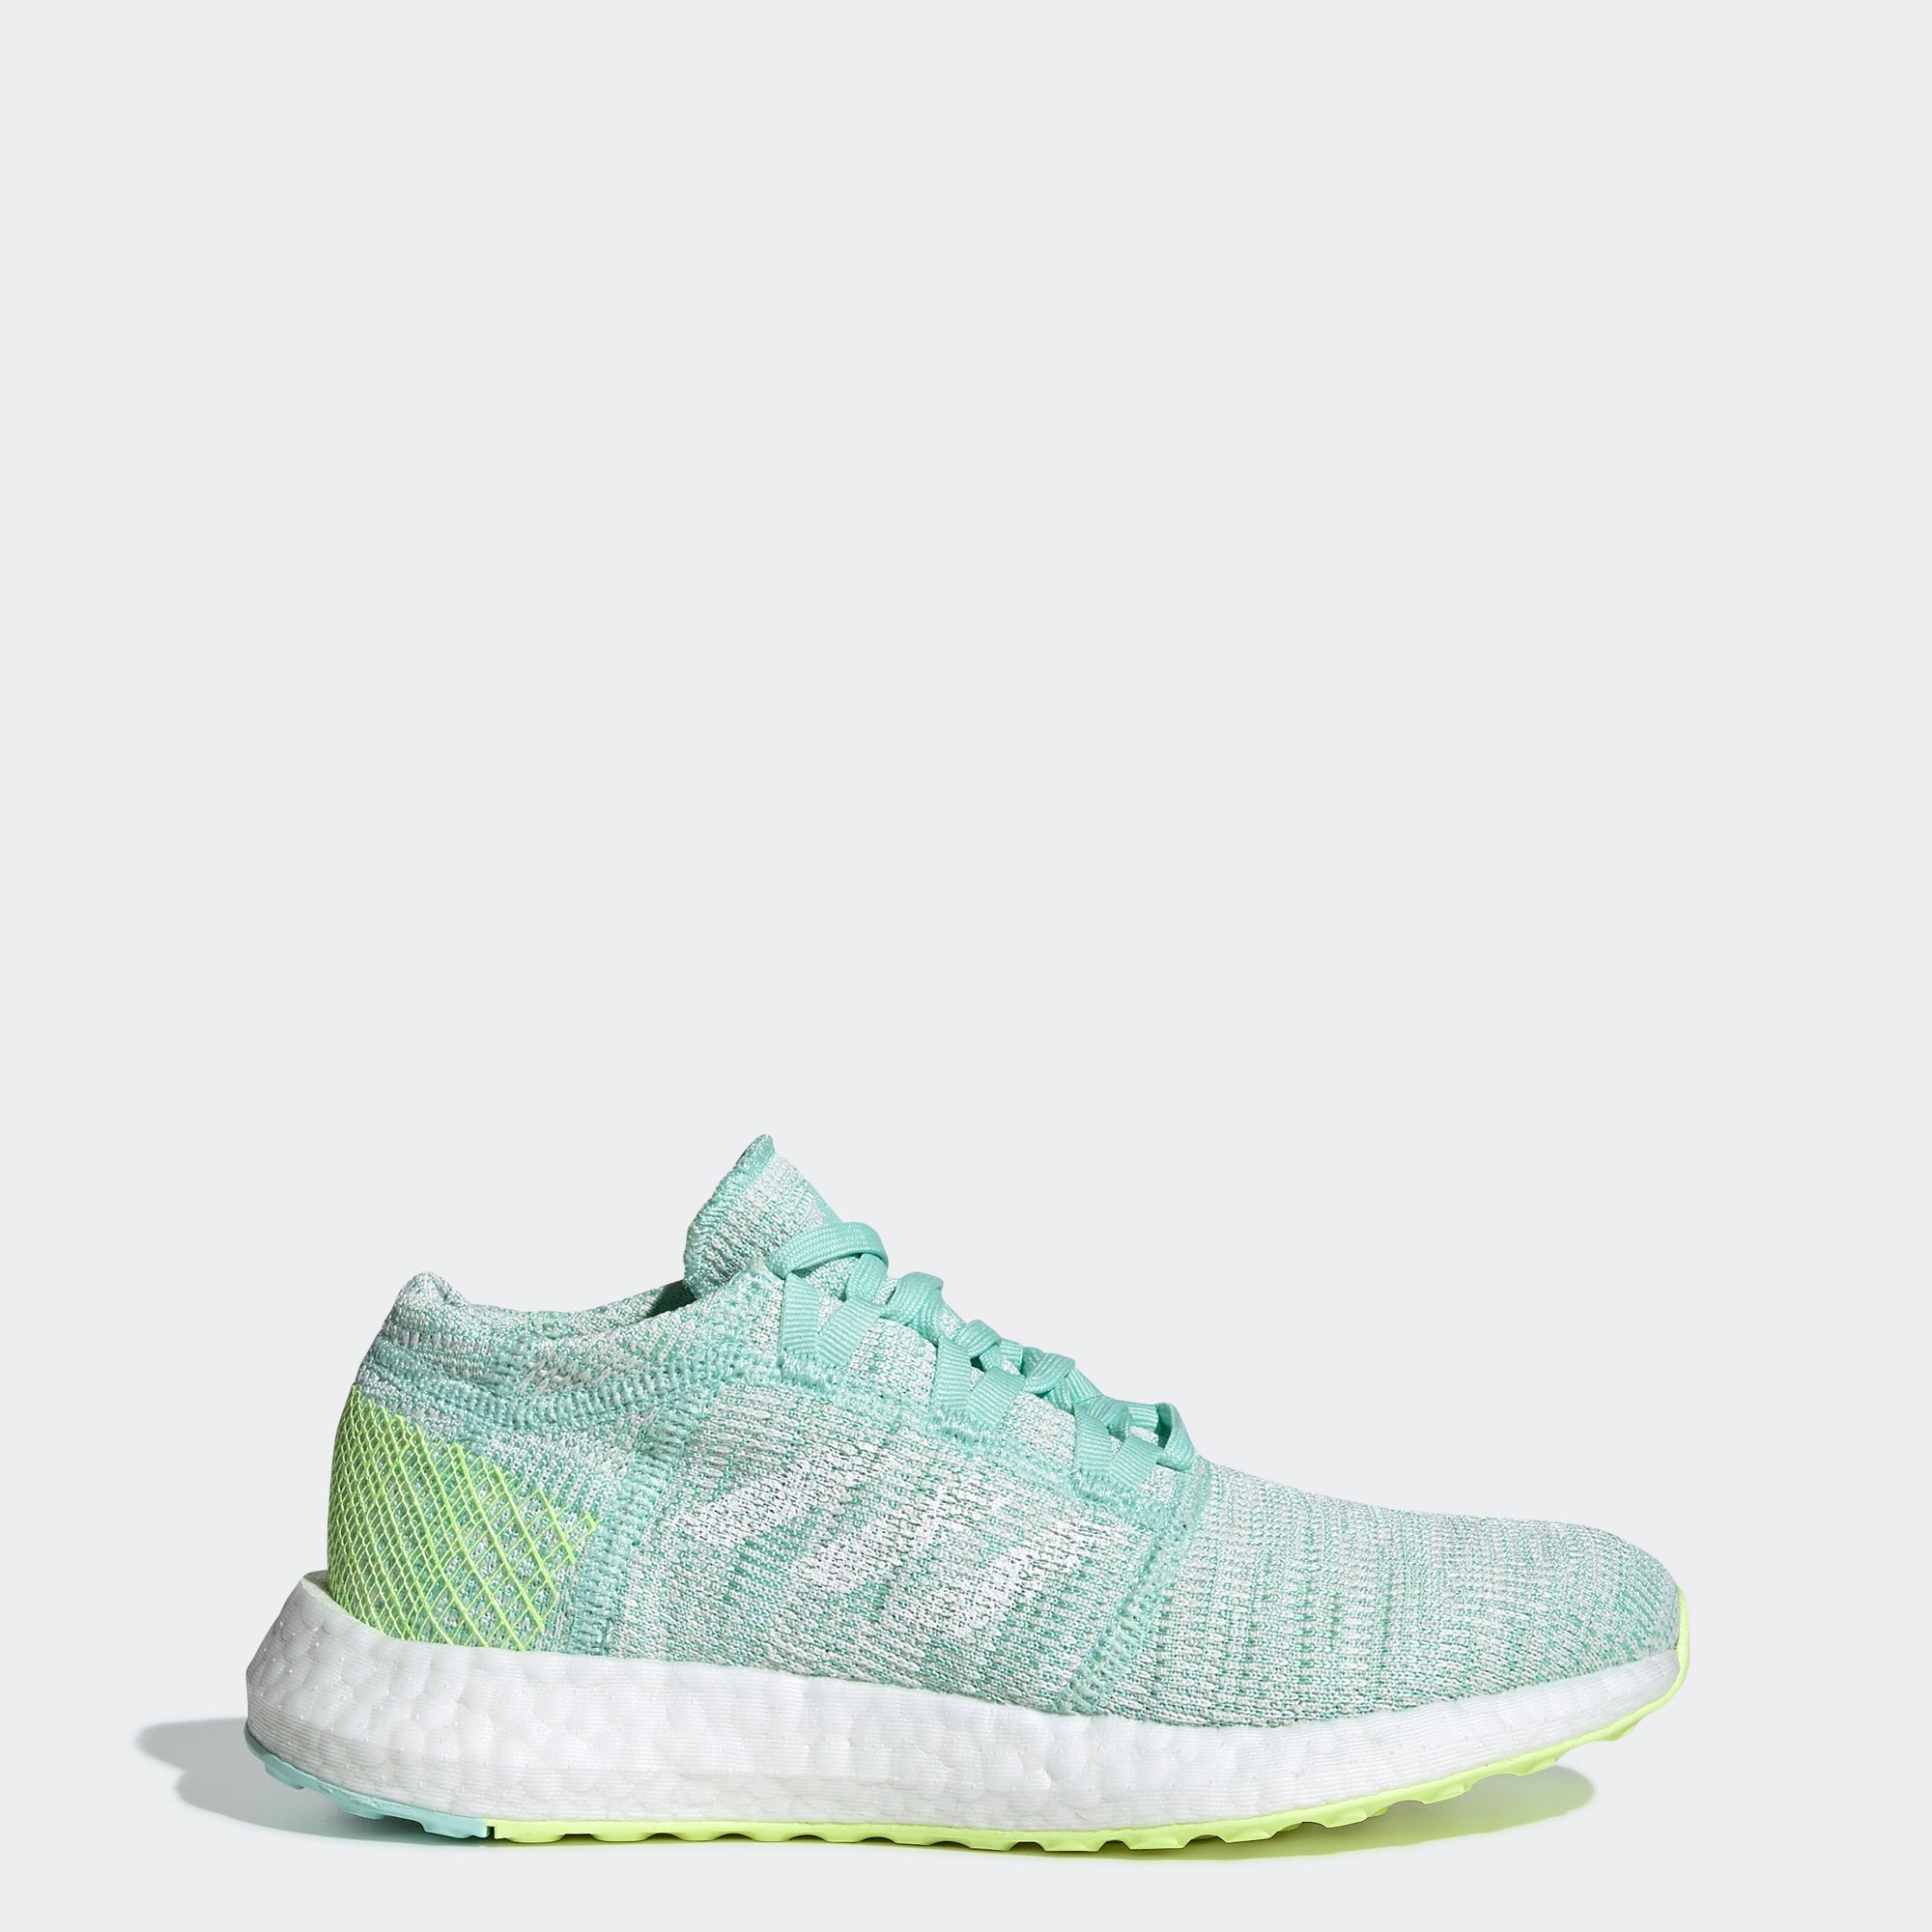 pureboost go shoes